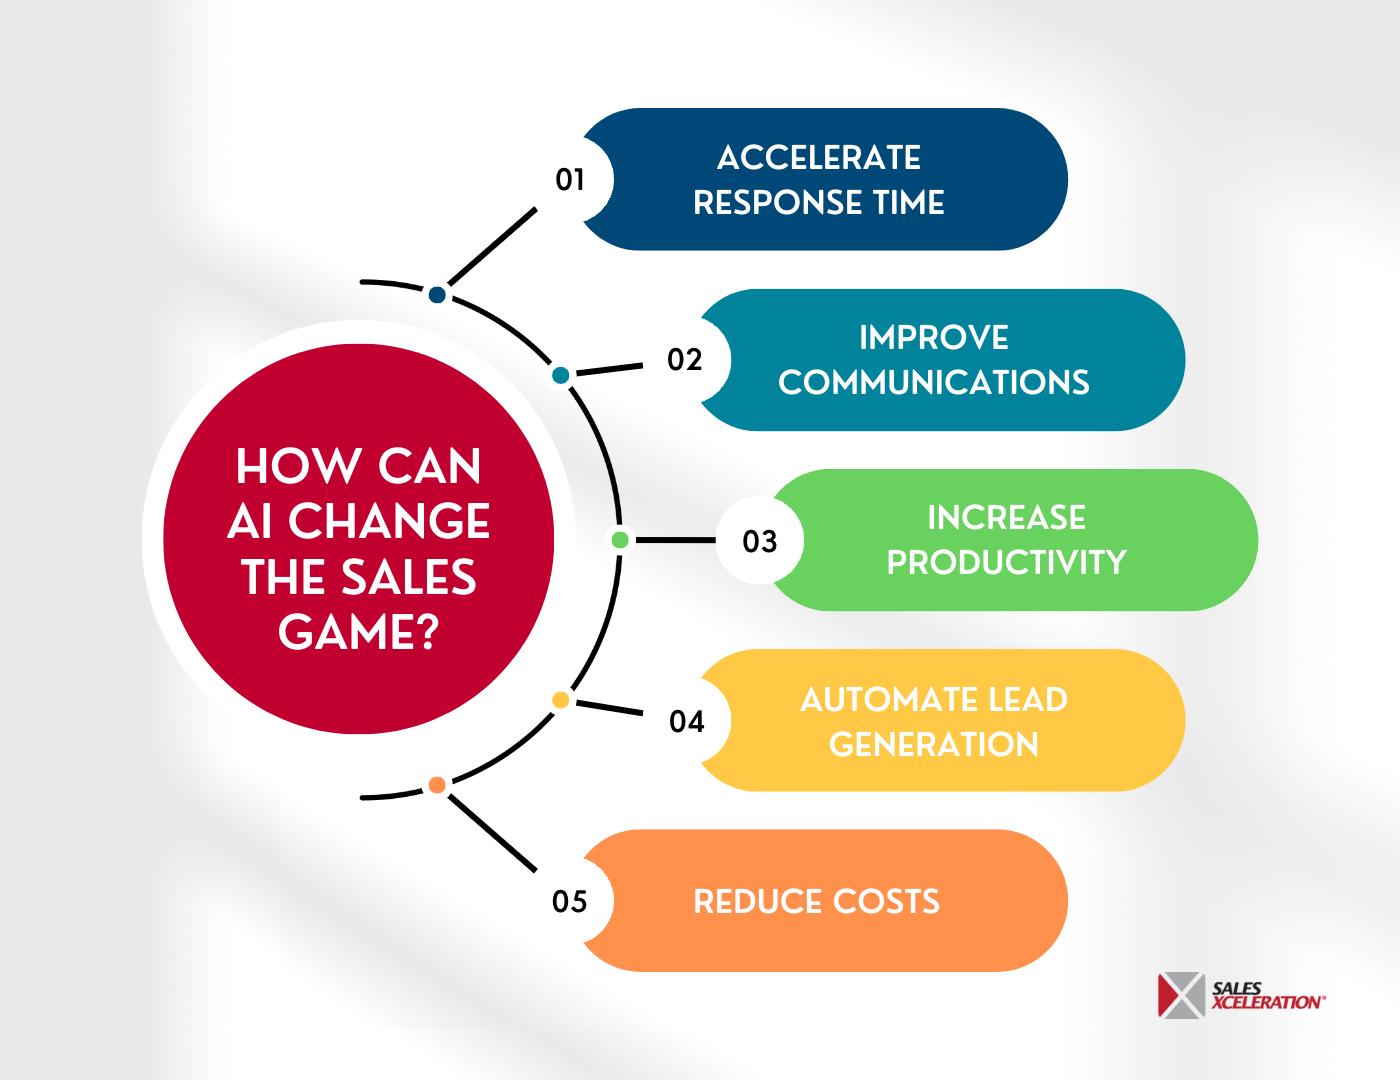 How AI can change the sales game